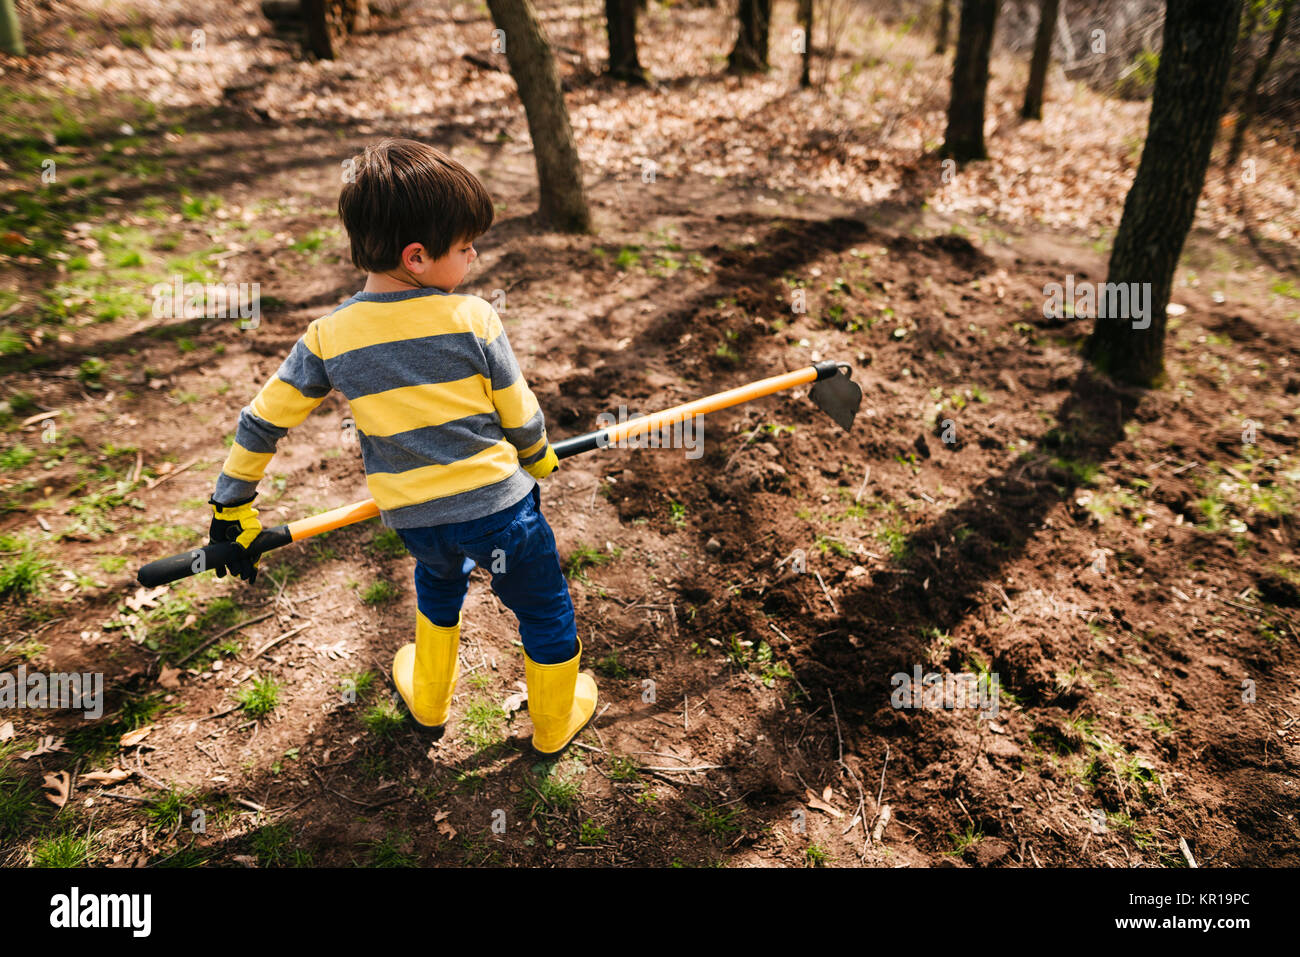 Boy in a garden digging soil with a hoe Stock Photo